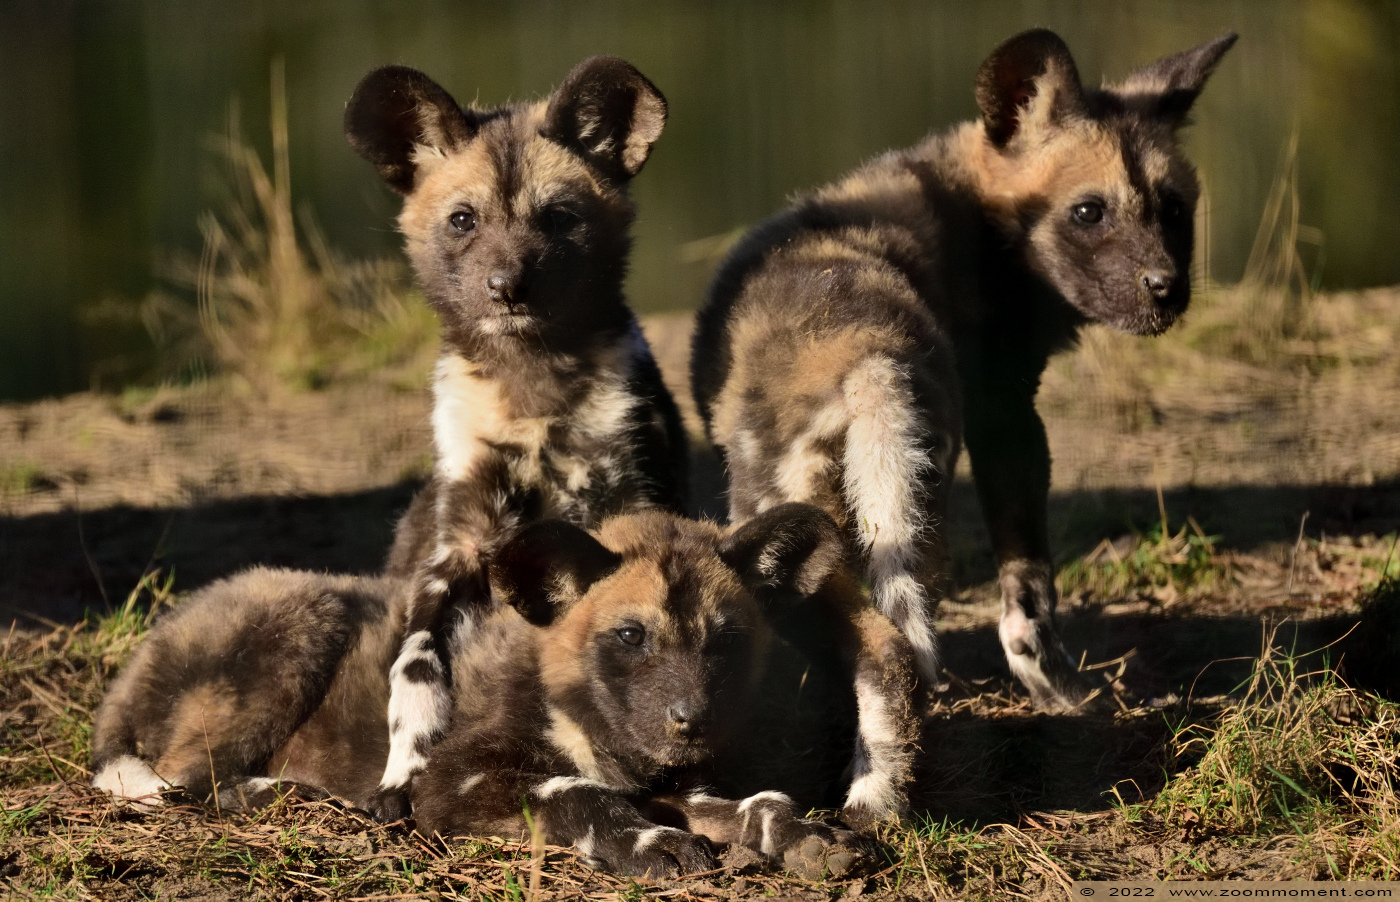 Afrikaanse wilde hond ( Lycaon pictus ) African wild dog
Pups, born 10 Januari 2022, on the picture about 3 weeks old

Trefwoorden: Safaripark Beekse Bergen Afrikaanse wilde hond Lycaon pictus African wild dog pup